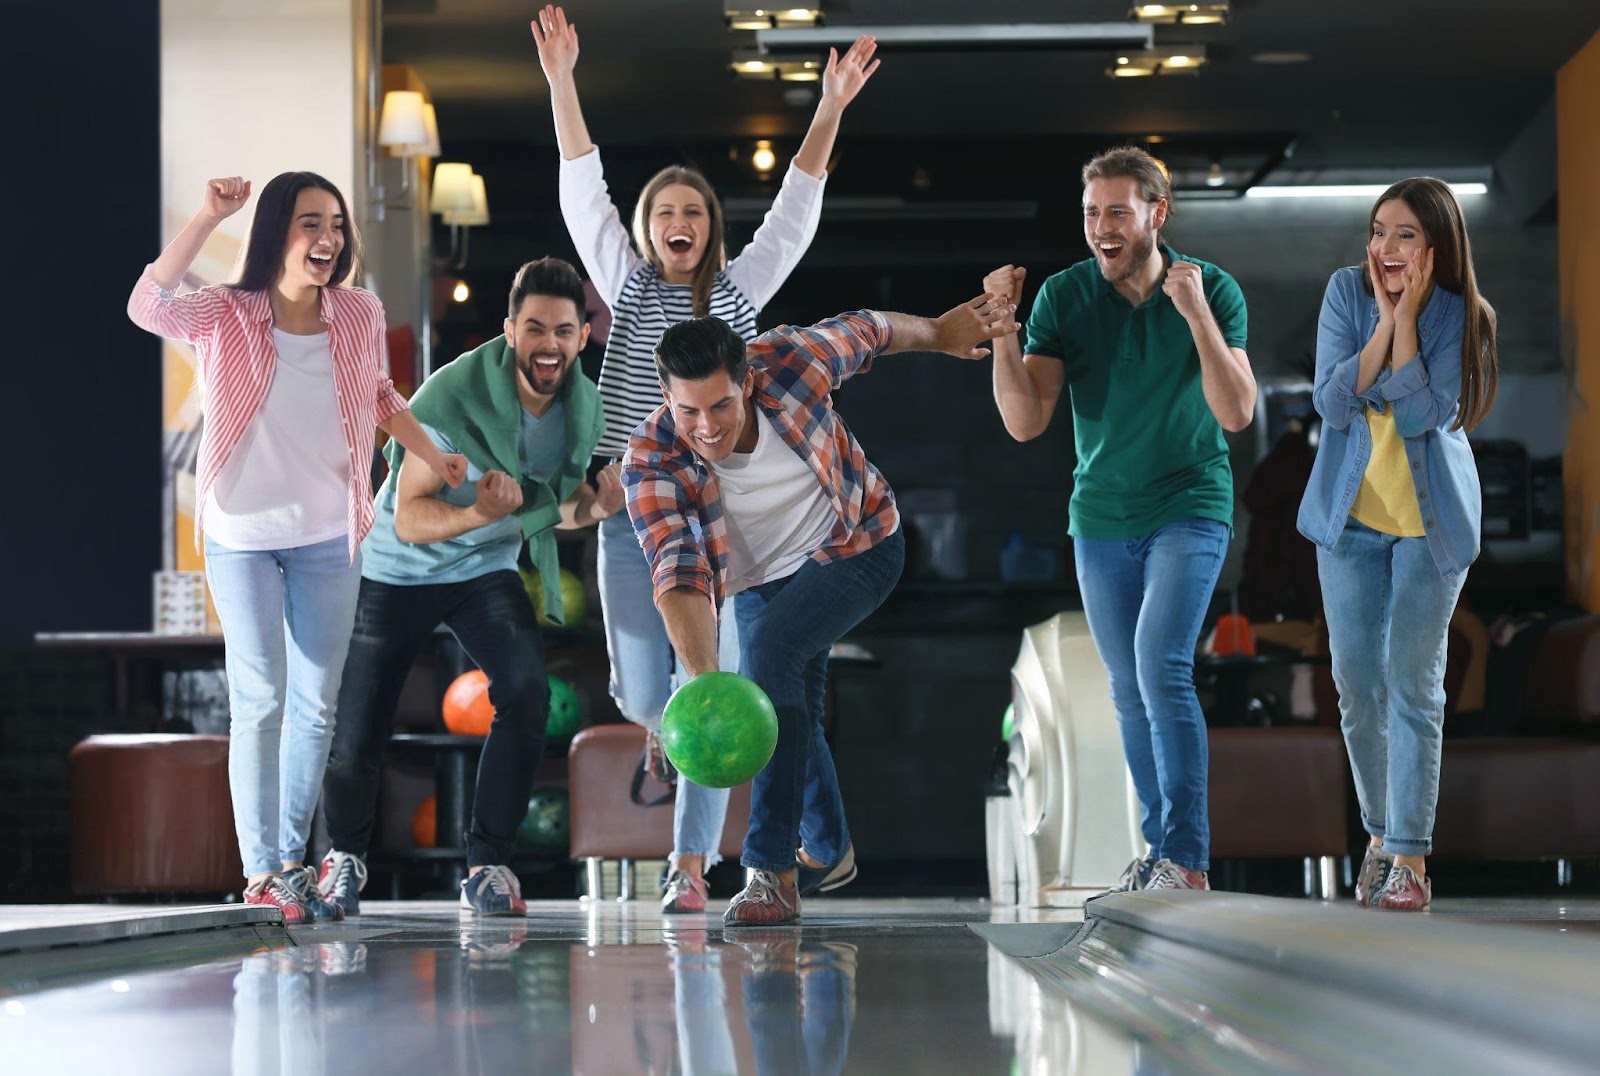 A diverse group of individuals enjoying a game of bowling at a bowling alley